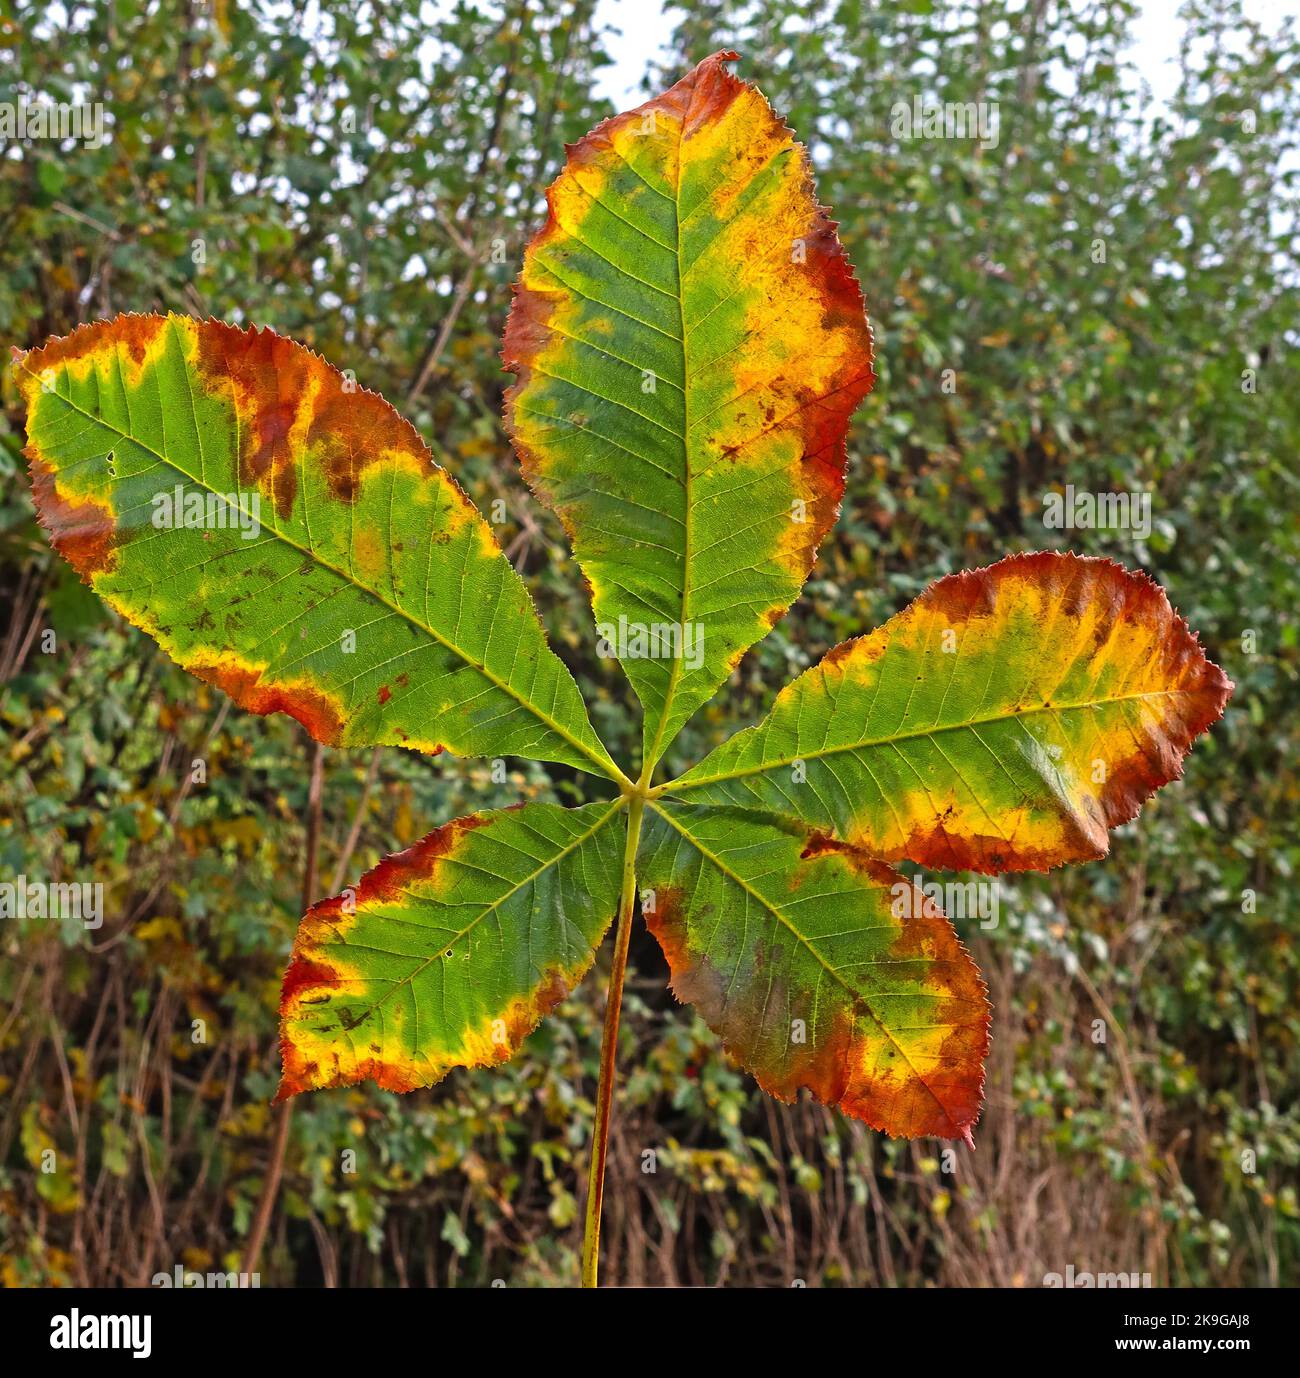 Autumn sycamore leaf, green, yellow and brown shades of colour Stock Photo